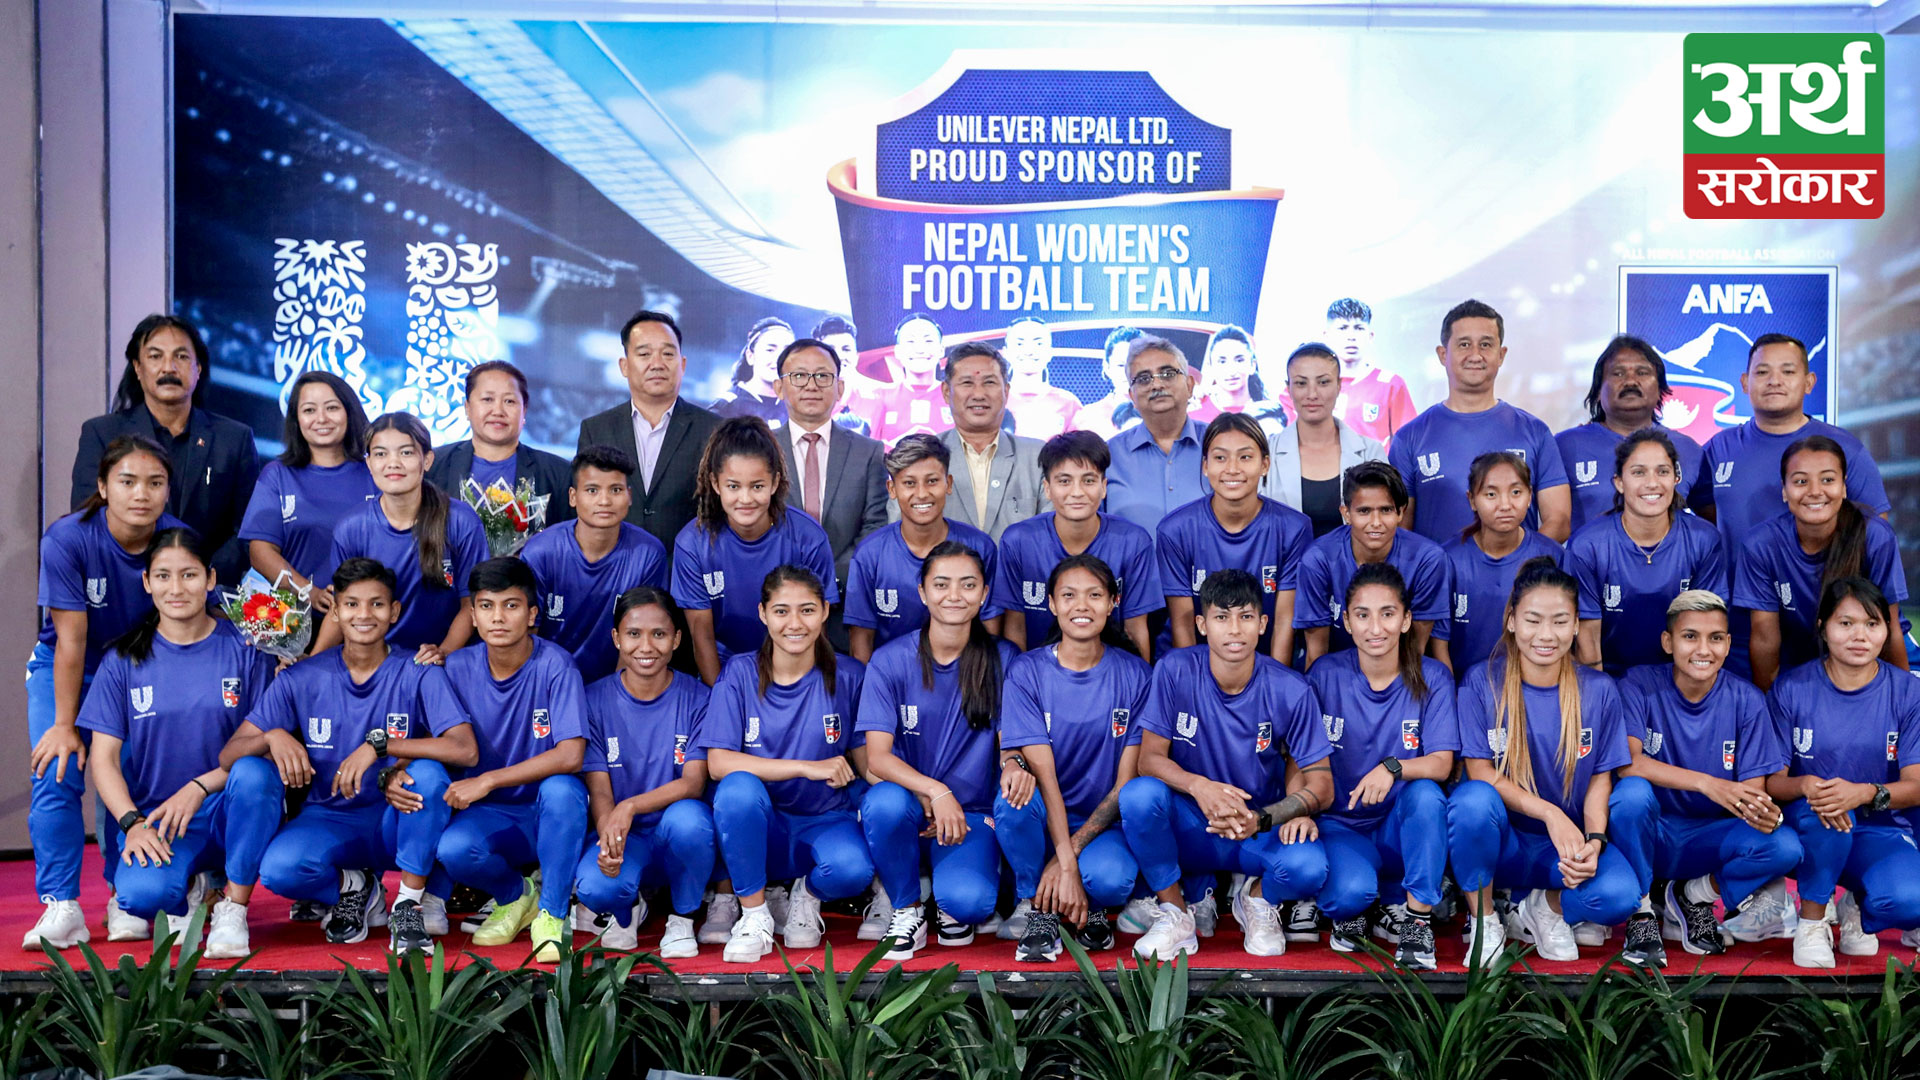 Unilever Nepal Joins Forces with the All-Nepal Football Association (ANFA) to support the Nepal Women’s Football Team.